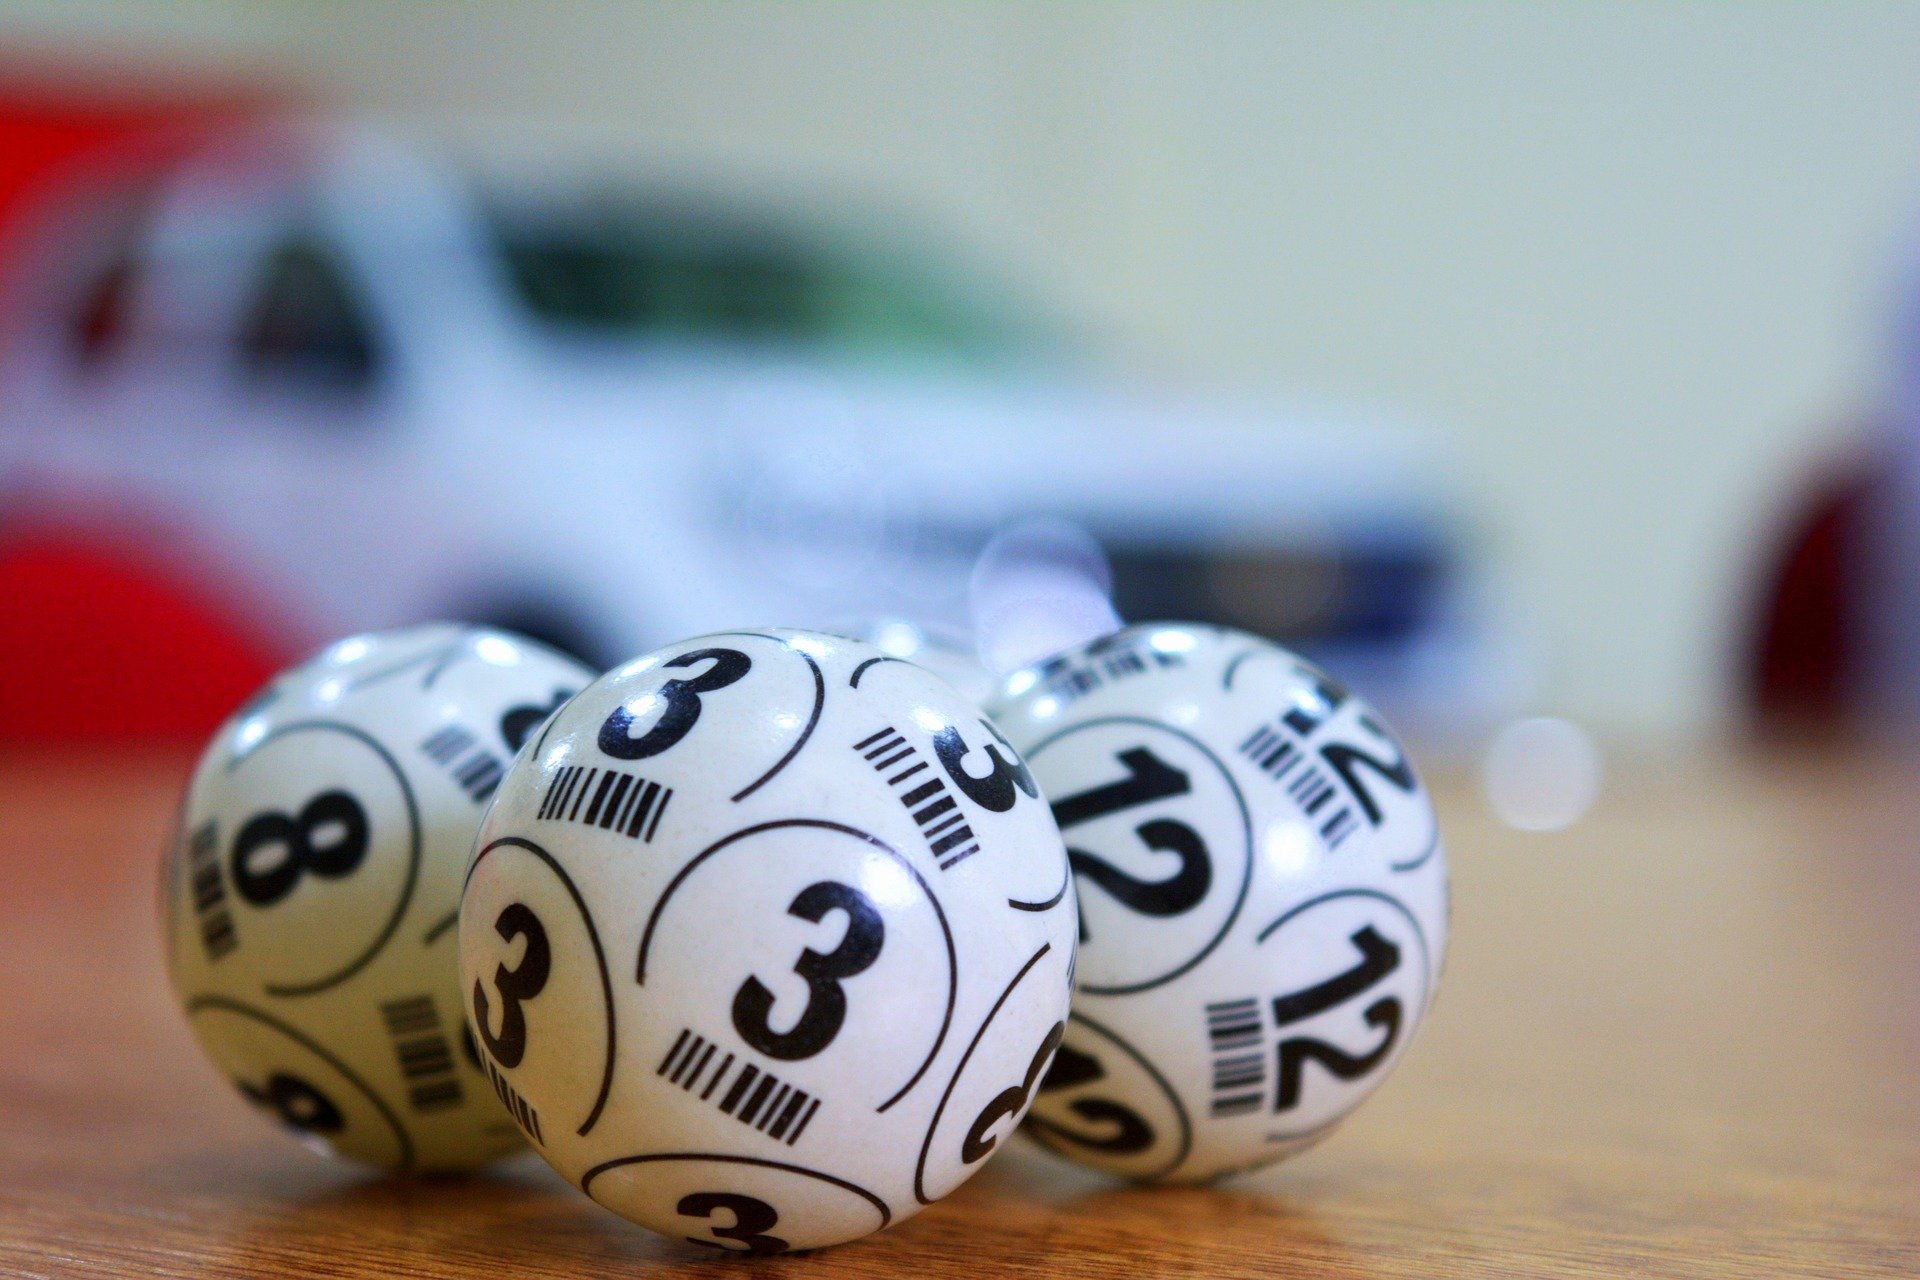 Three lottery balls with different numbers on them | Photo: Pixabay/Alejandro Garay